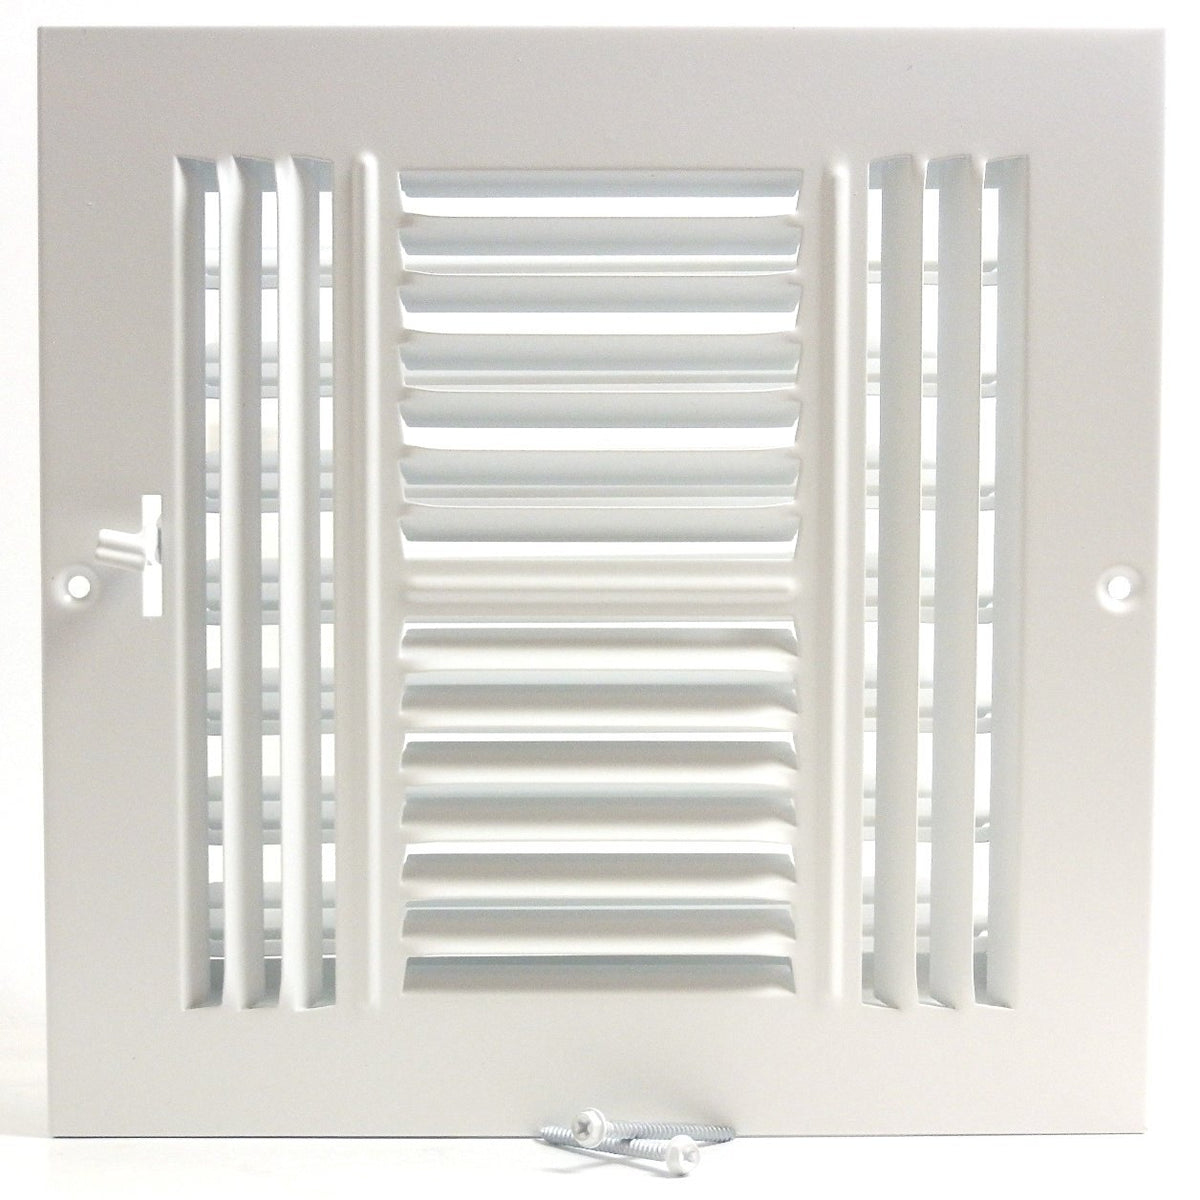 8&quot; X 8&quot; 4-Way AIR SUPPLY GRILLE - DUCT COVER &amp; DIFFUSER - Flat Stamped Face